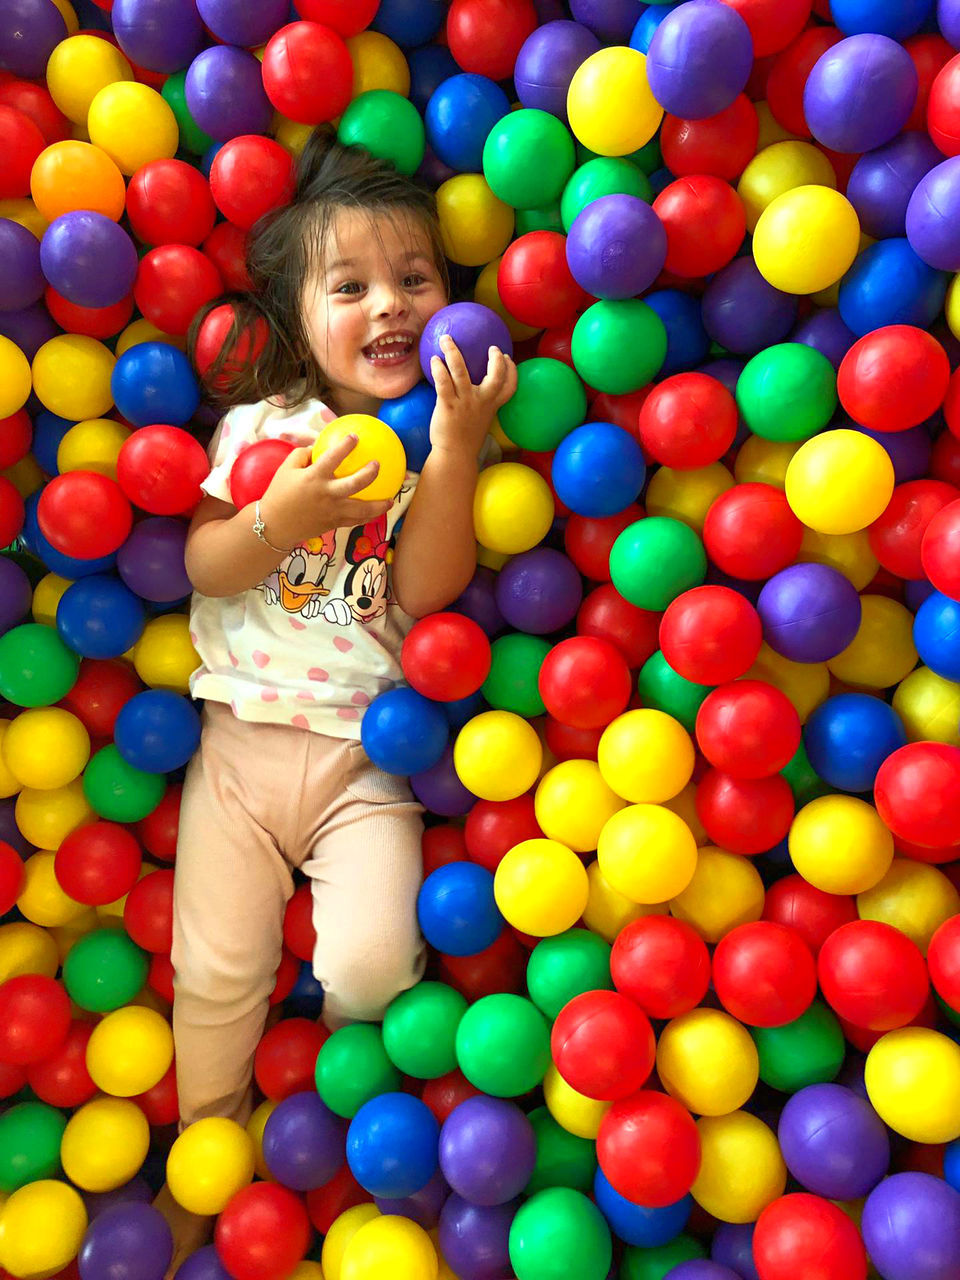 childhood, child, leisure activity, one person, enjoyment, fun, happiness, multi colored, playing, full length, ball, real people, smiling, emotion, girls, lifestyles, casual clothing, sphere, innocence, excitement